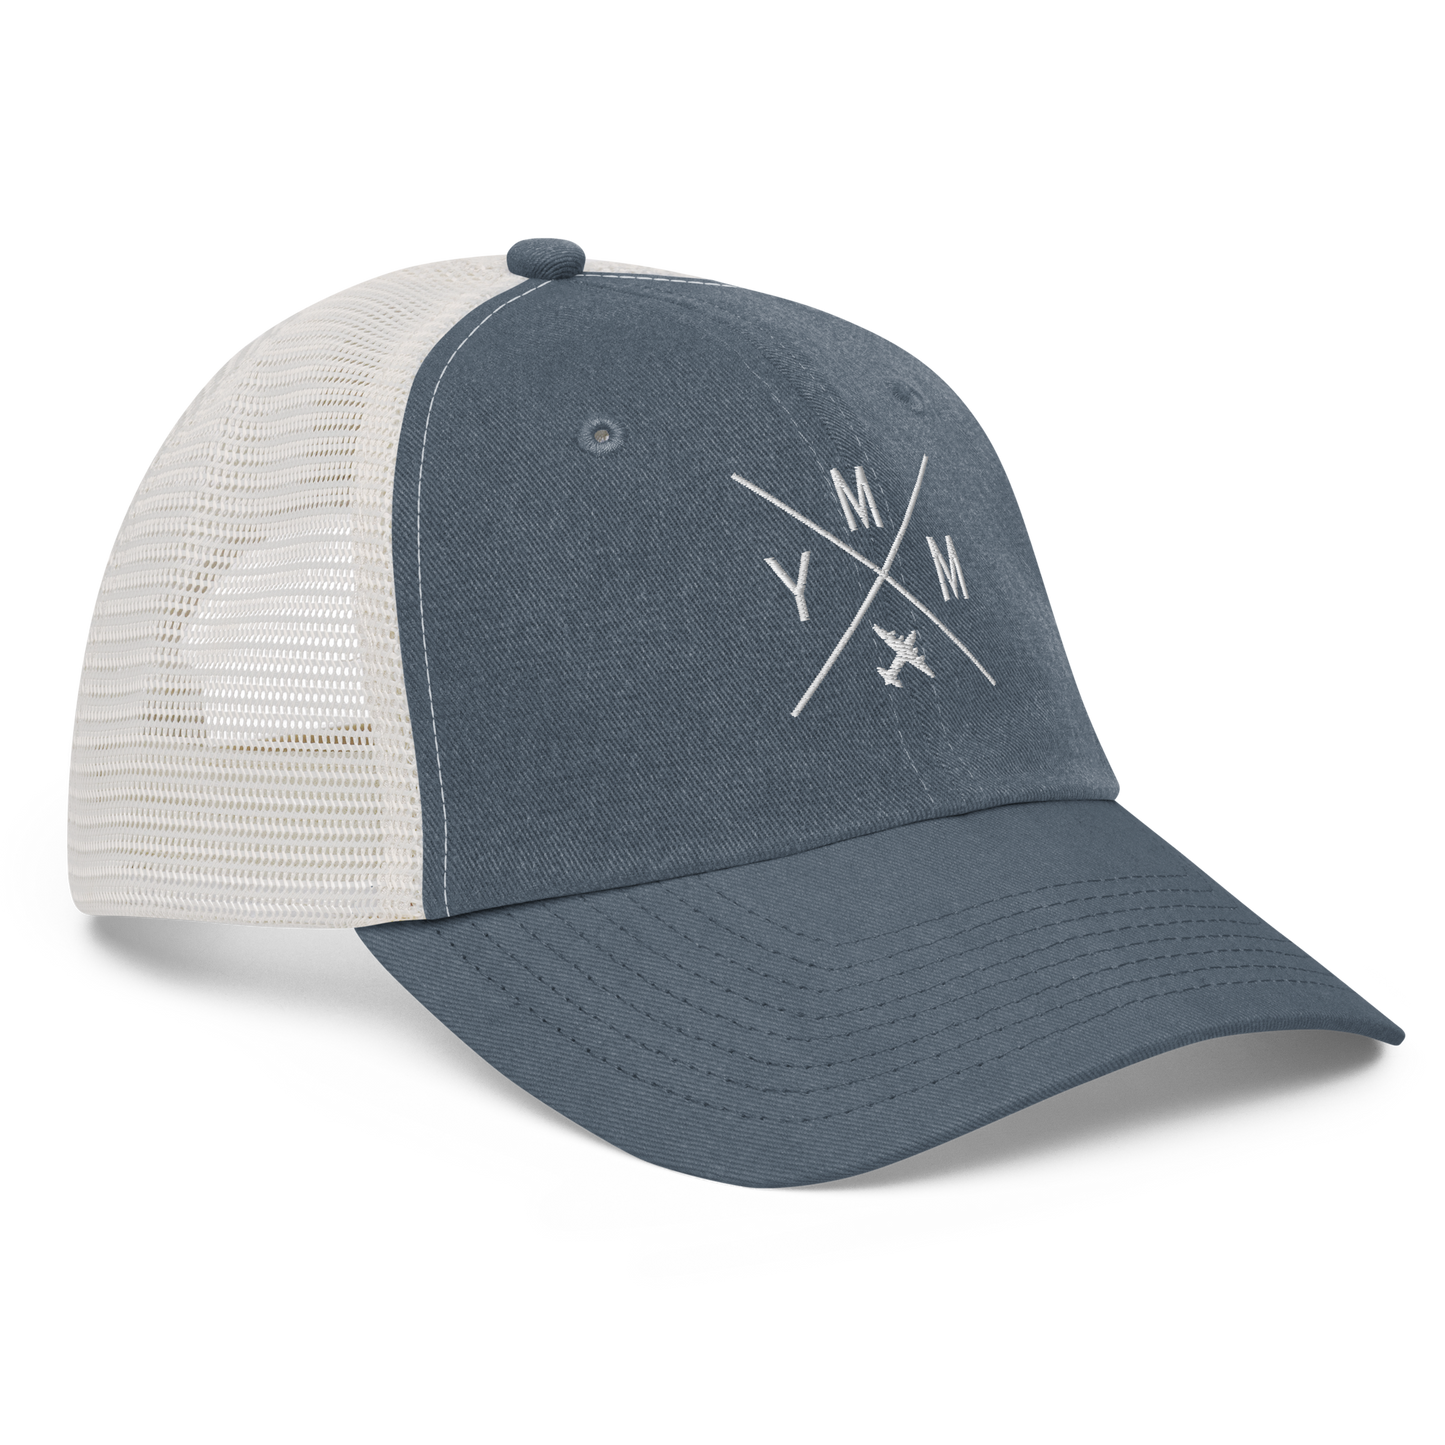 Crossed-X Pigment-Dyed Trucker Cap • YMM Fort McMurray • YHM Designs - Image 07